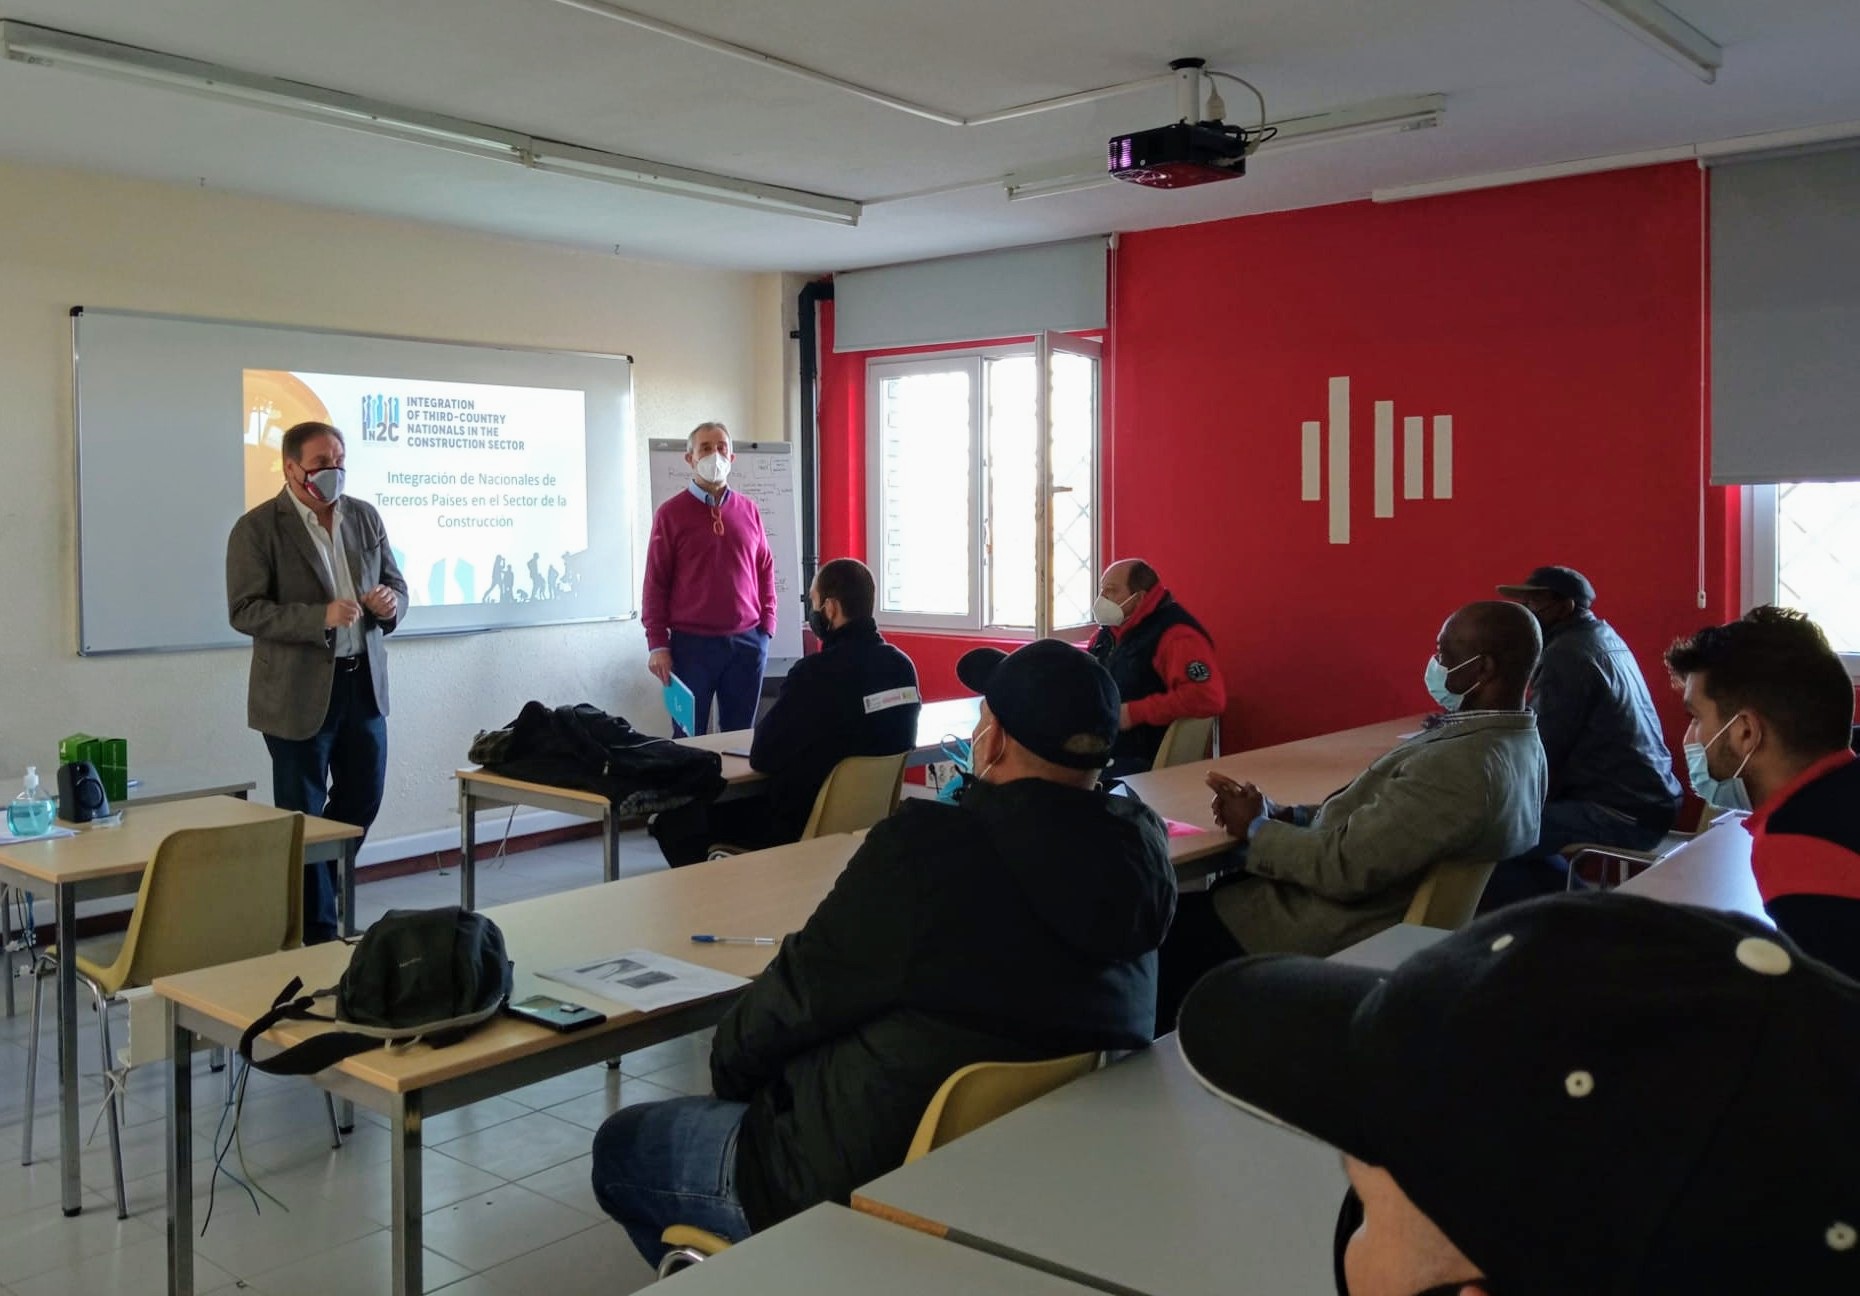 Presentation of the In2C project at the facilities of the CLF of Cantabria